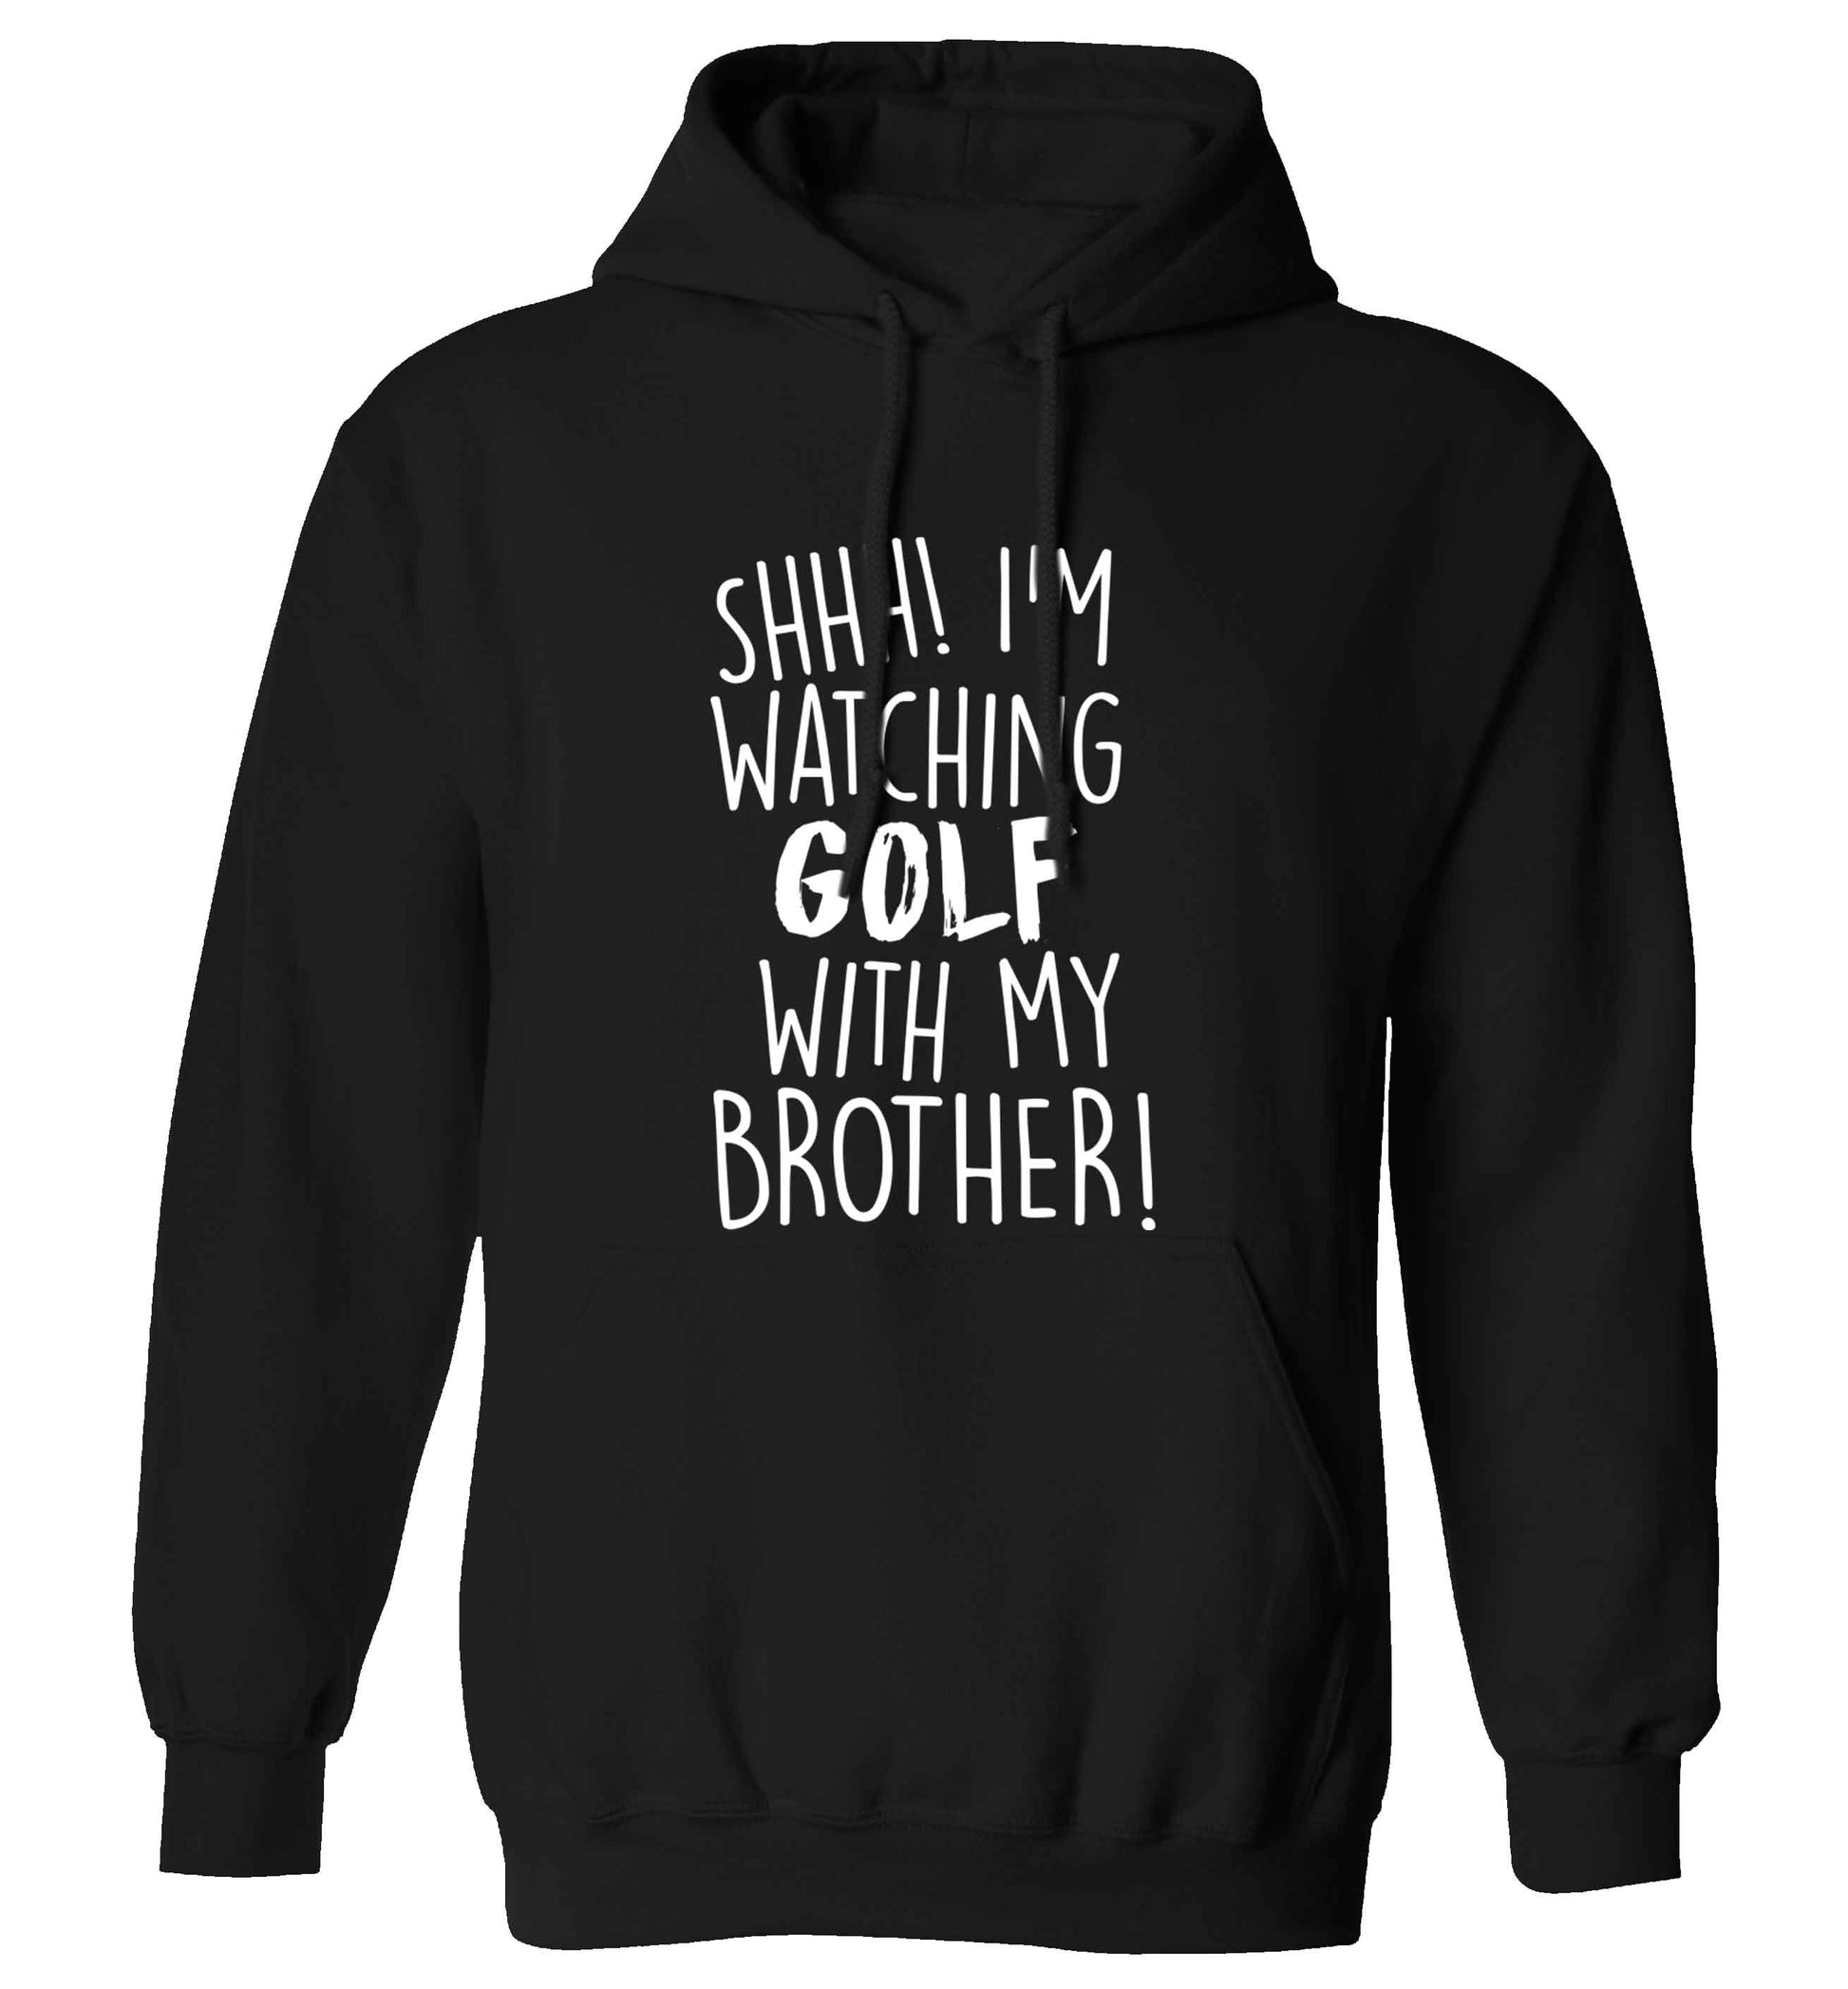 Shh I'm watching golf with my brother adults unisex black hoodie 2XL